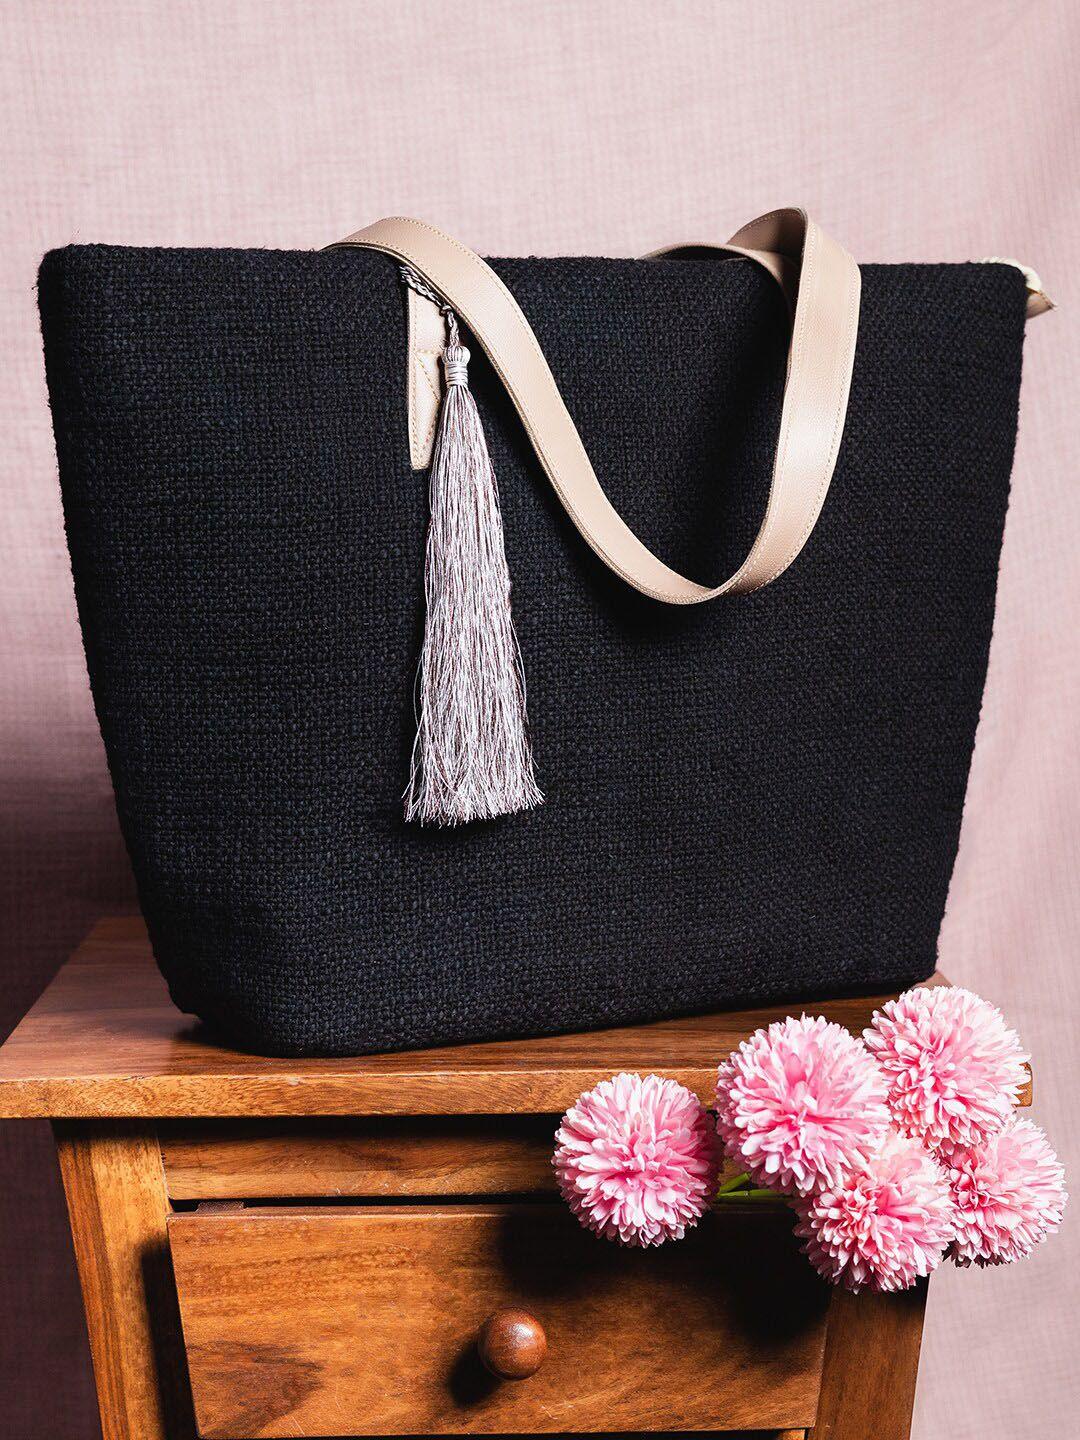 deebaco black structured tote bag with tasselled